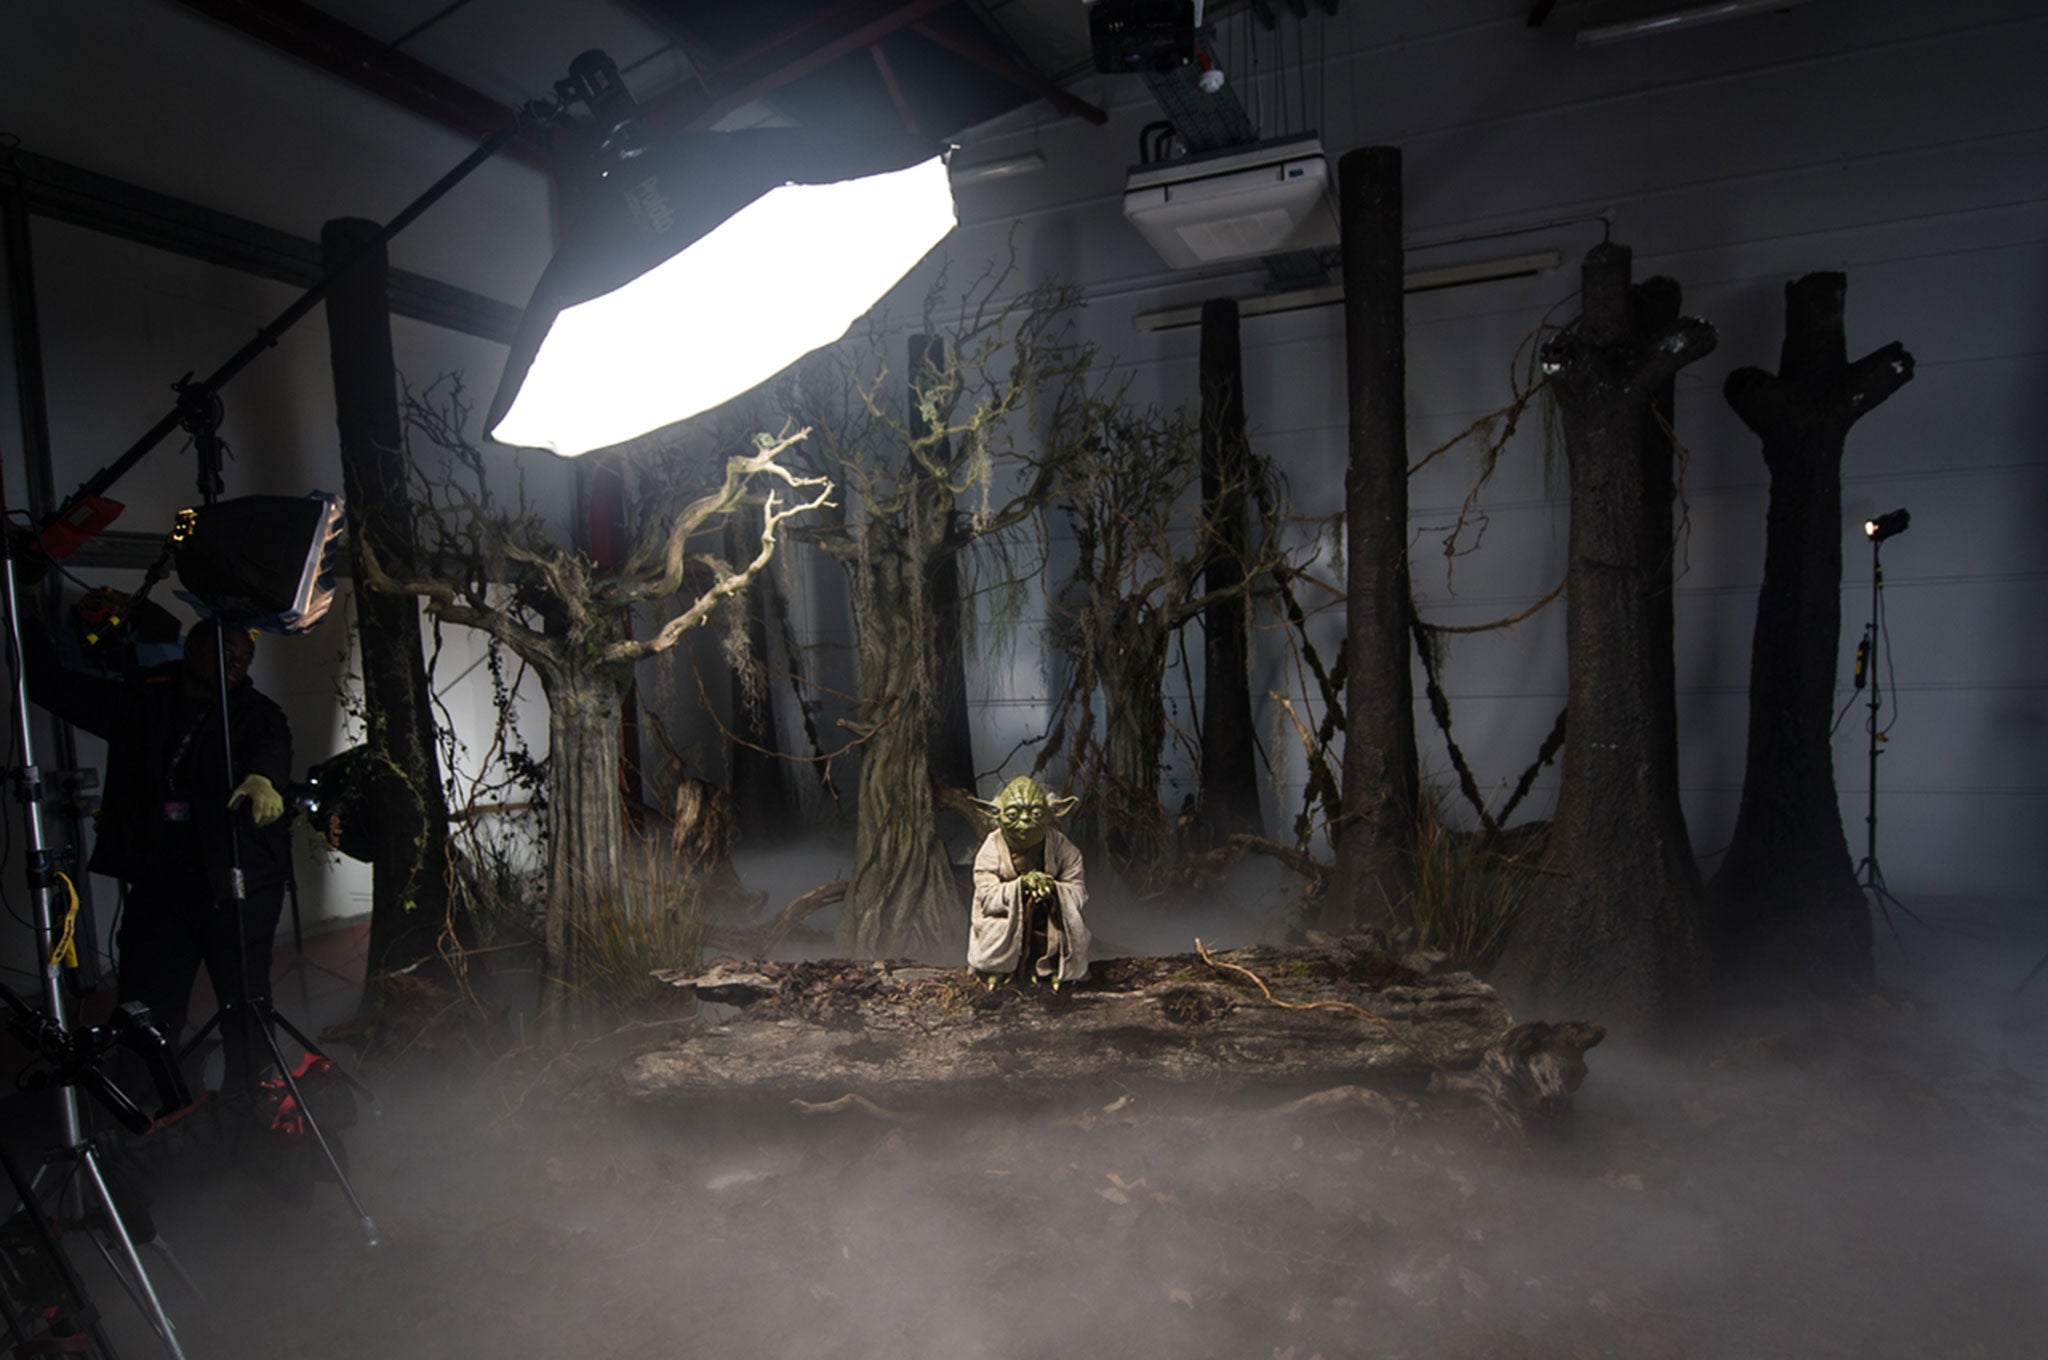 Yoda, the first wax figure destined for the new Madame Tussauds Star Wars experience, is revealed